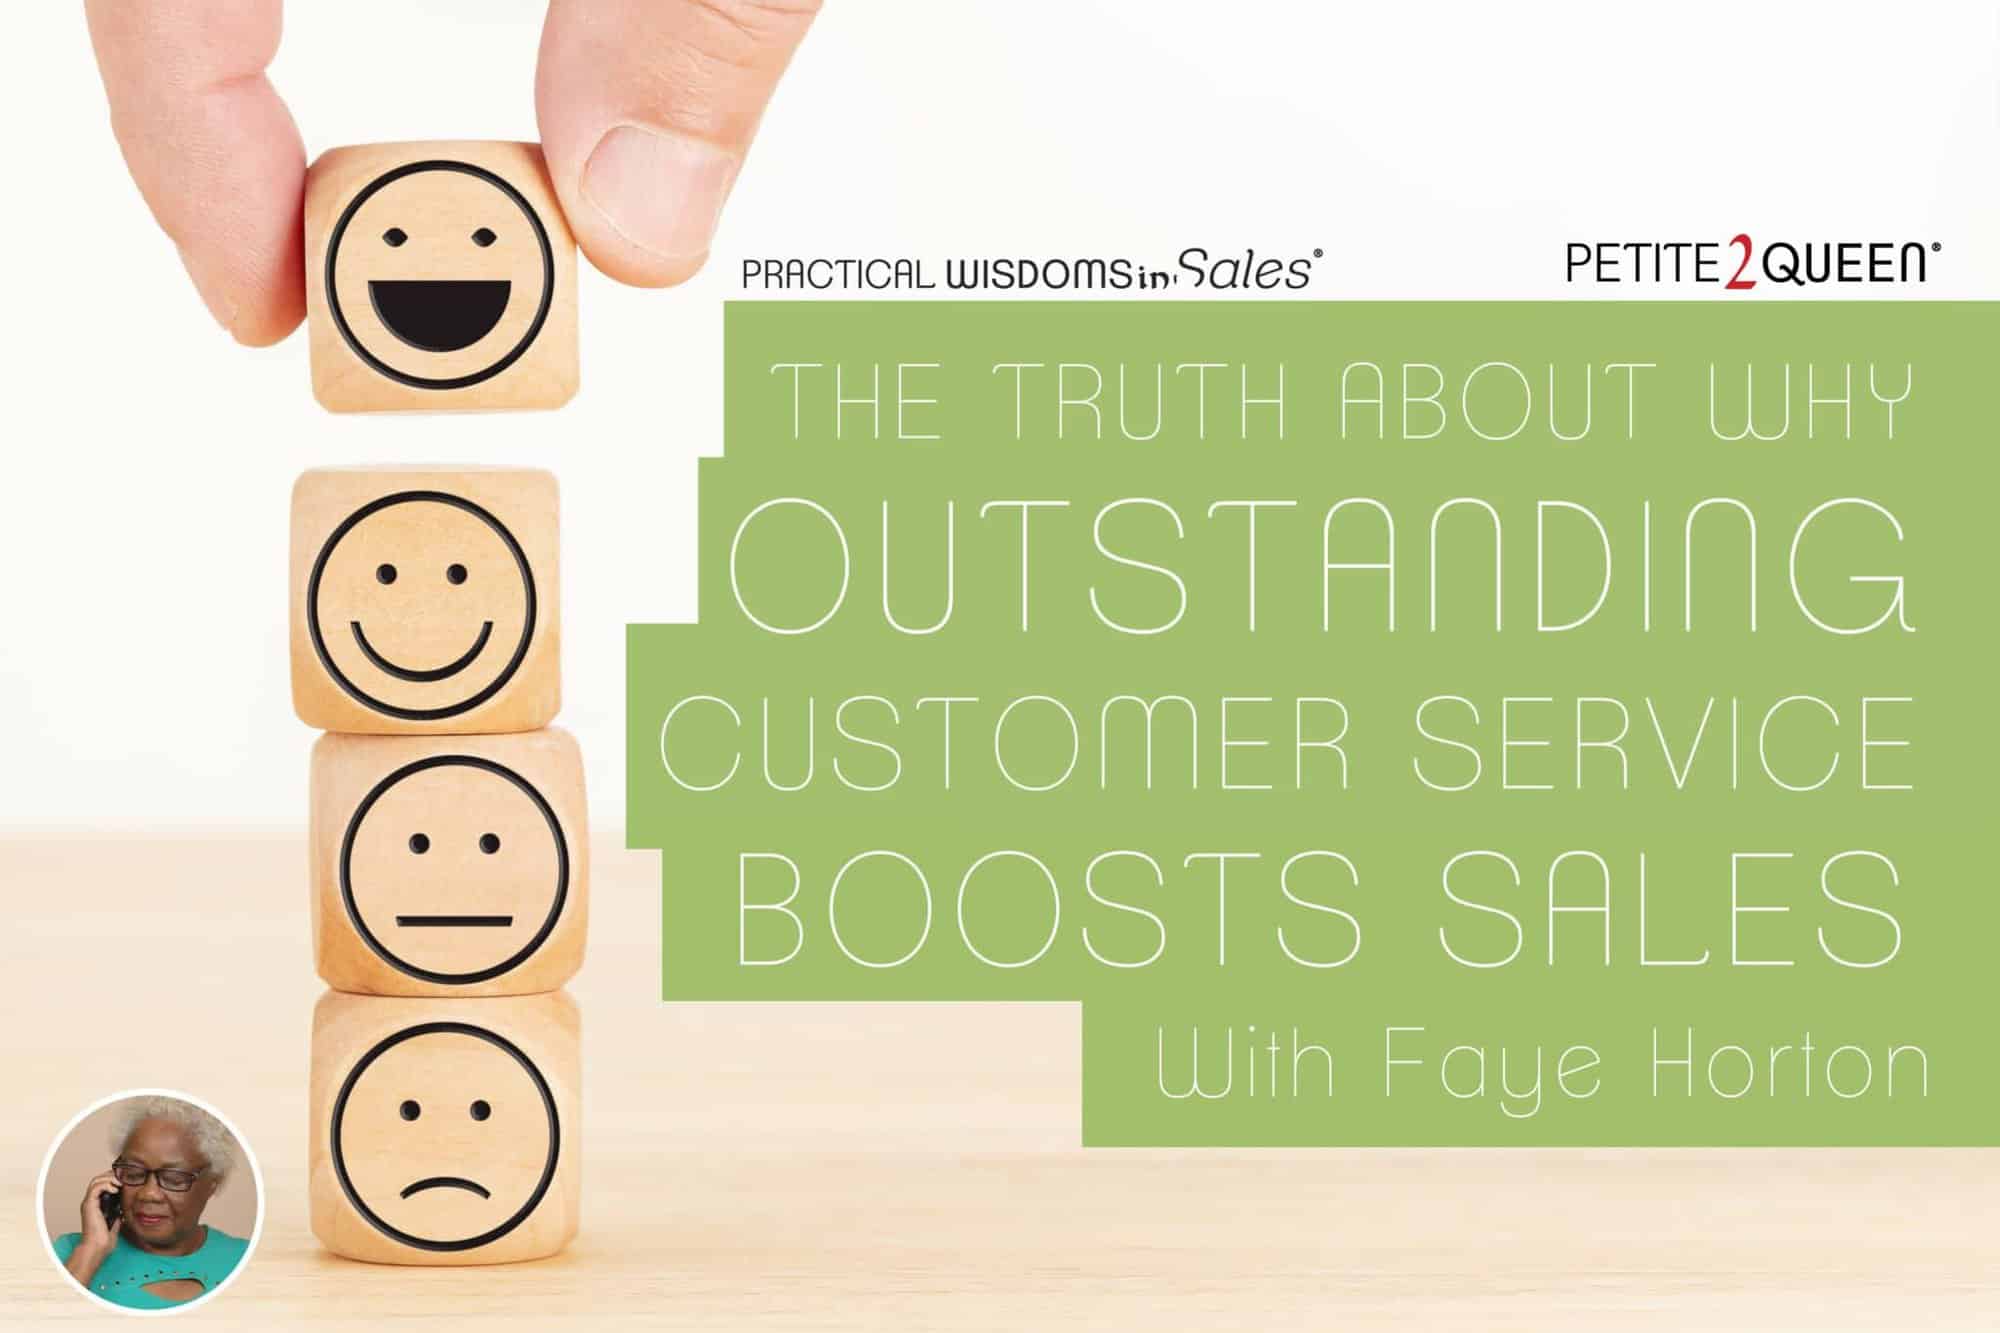 The Truth About Why Outstanding Customer Service Boosts Sales - Faye Horton